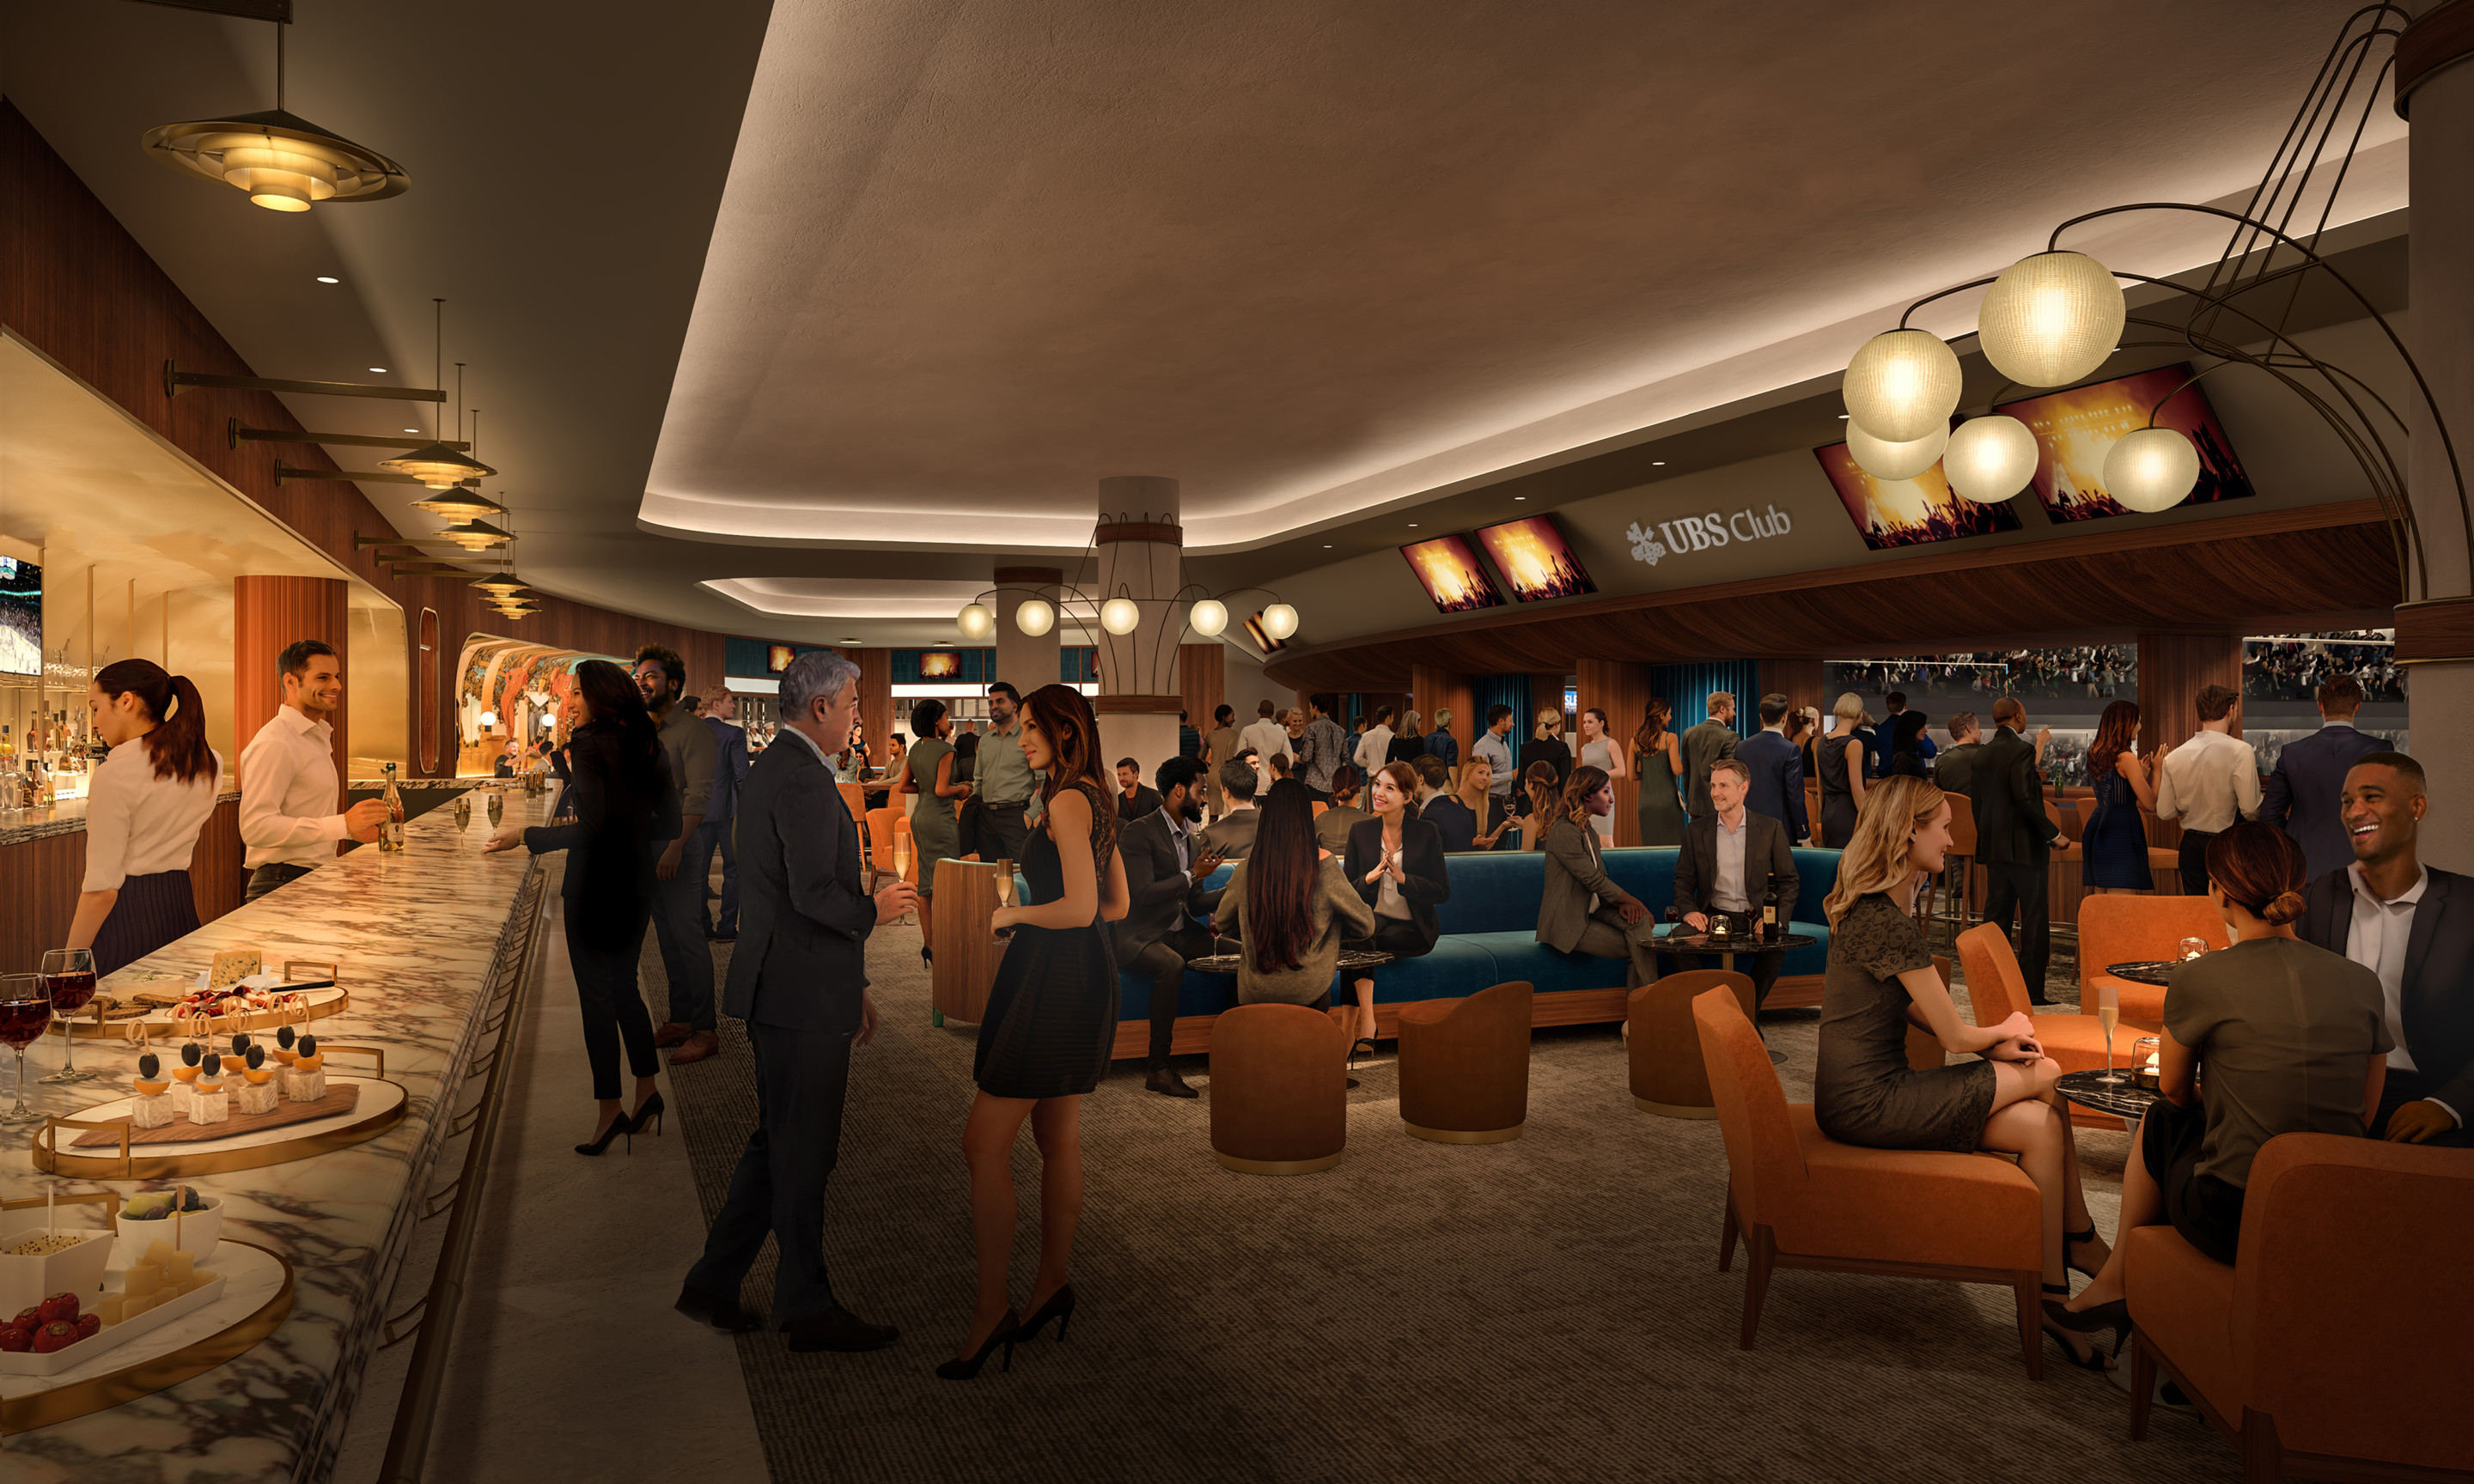 Interior rendering of the UBS club at the Islanders new arena